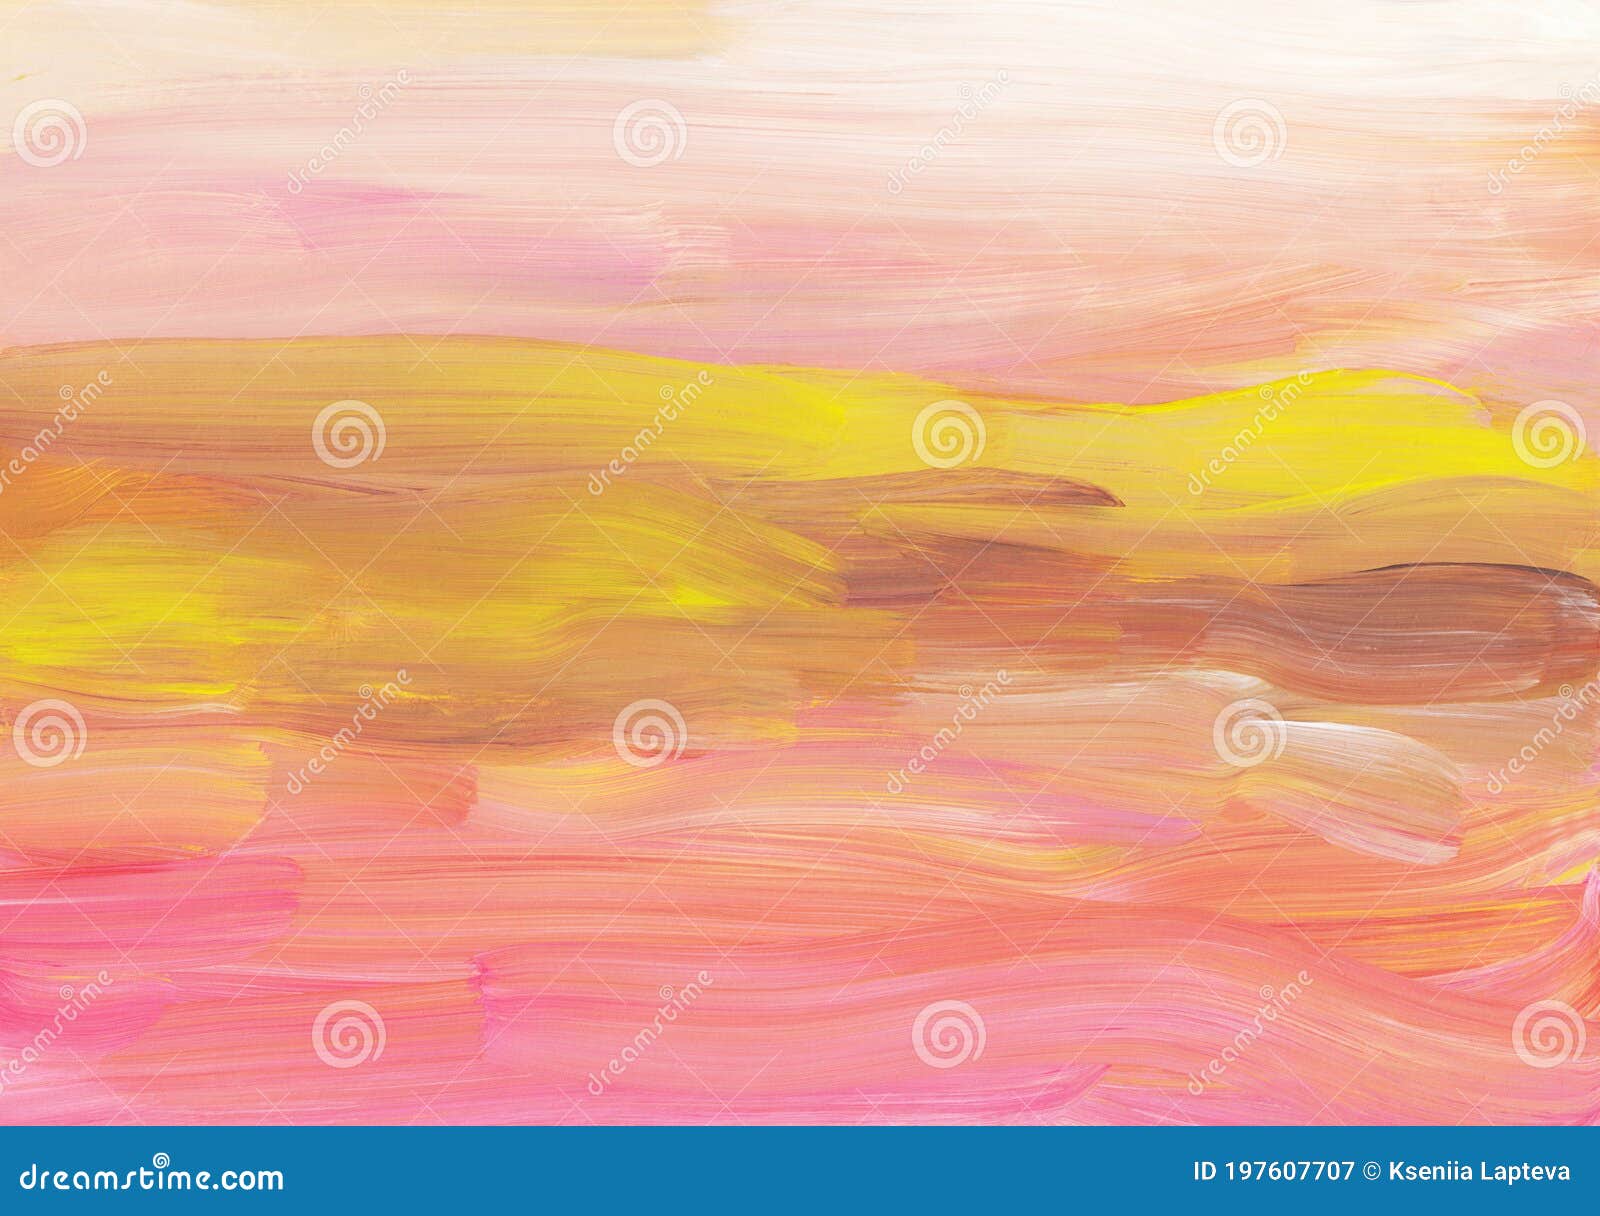 Abstract White & Yellow Oil Paint Brush Stokes Texture Background